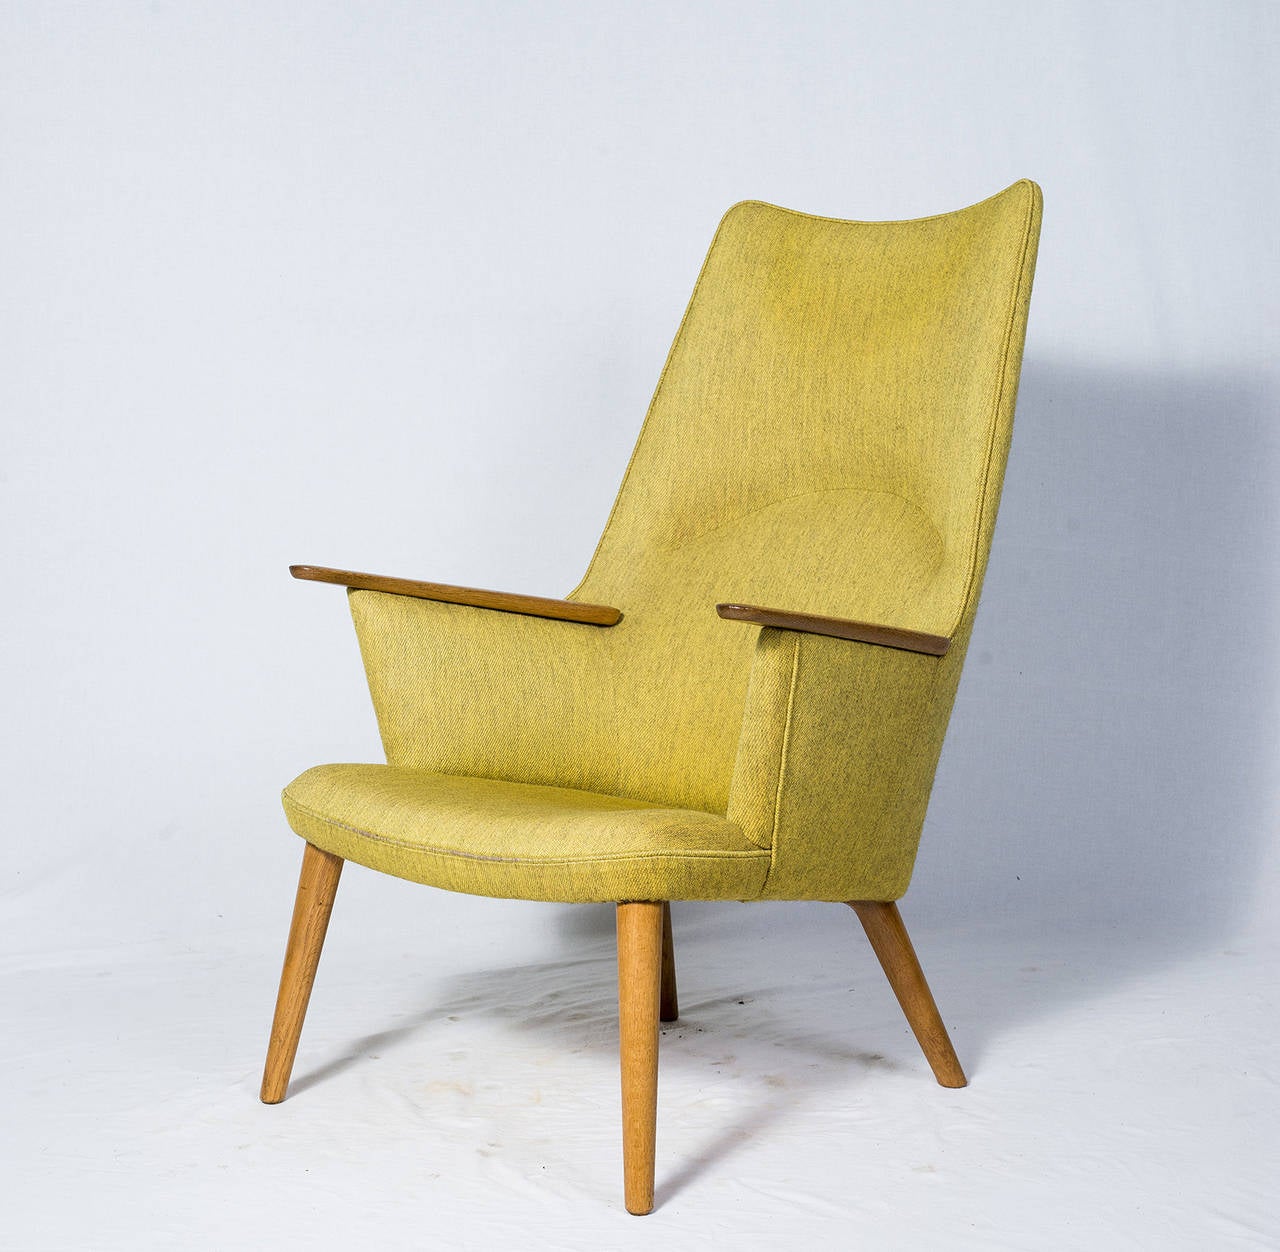 Hans Wegner AP-27 lounge chair designed in 1954 and produced by A. P. Stolen.  Store formerly known as ARTFUL DODGER INC